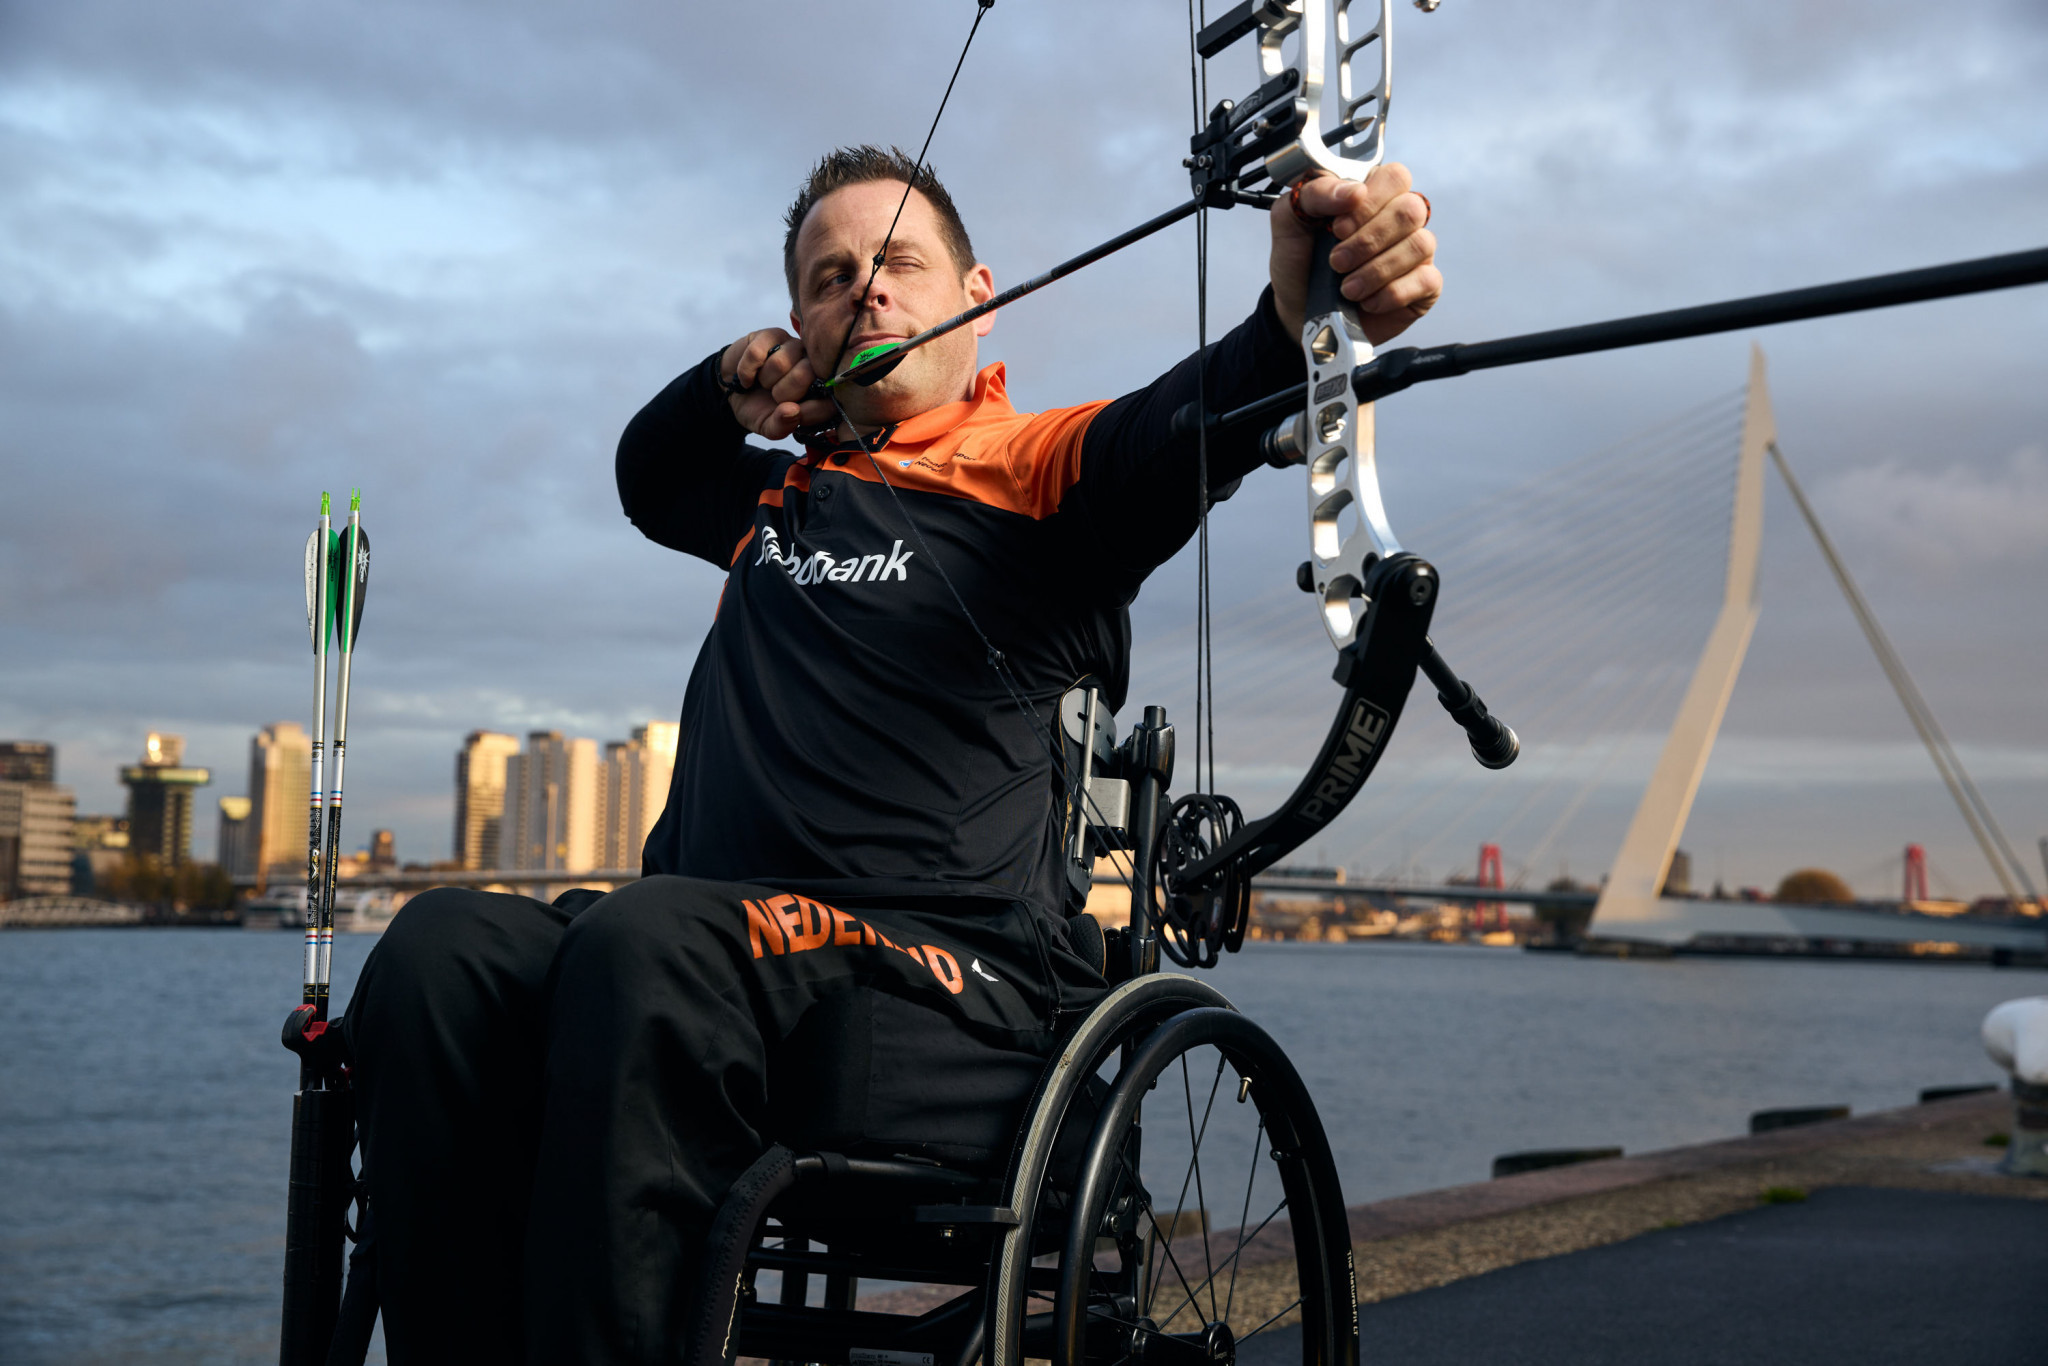 European Para Championships BV is seeking for a host city for the second edition of the European Para Championships ©European Para Championships